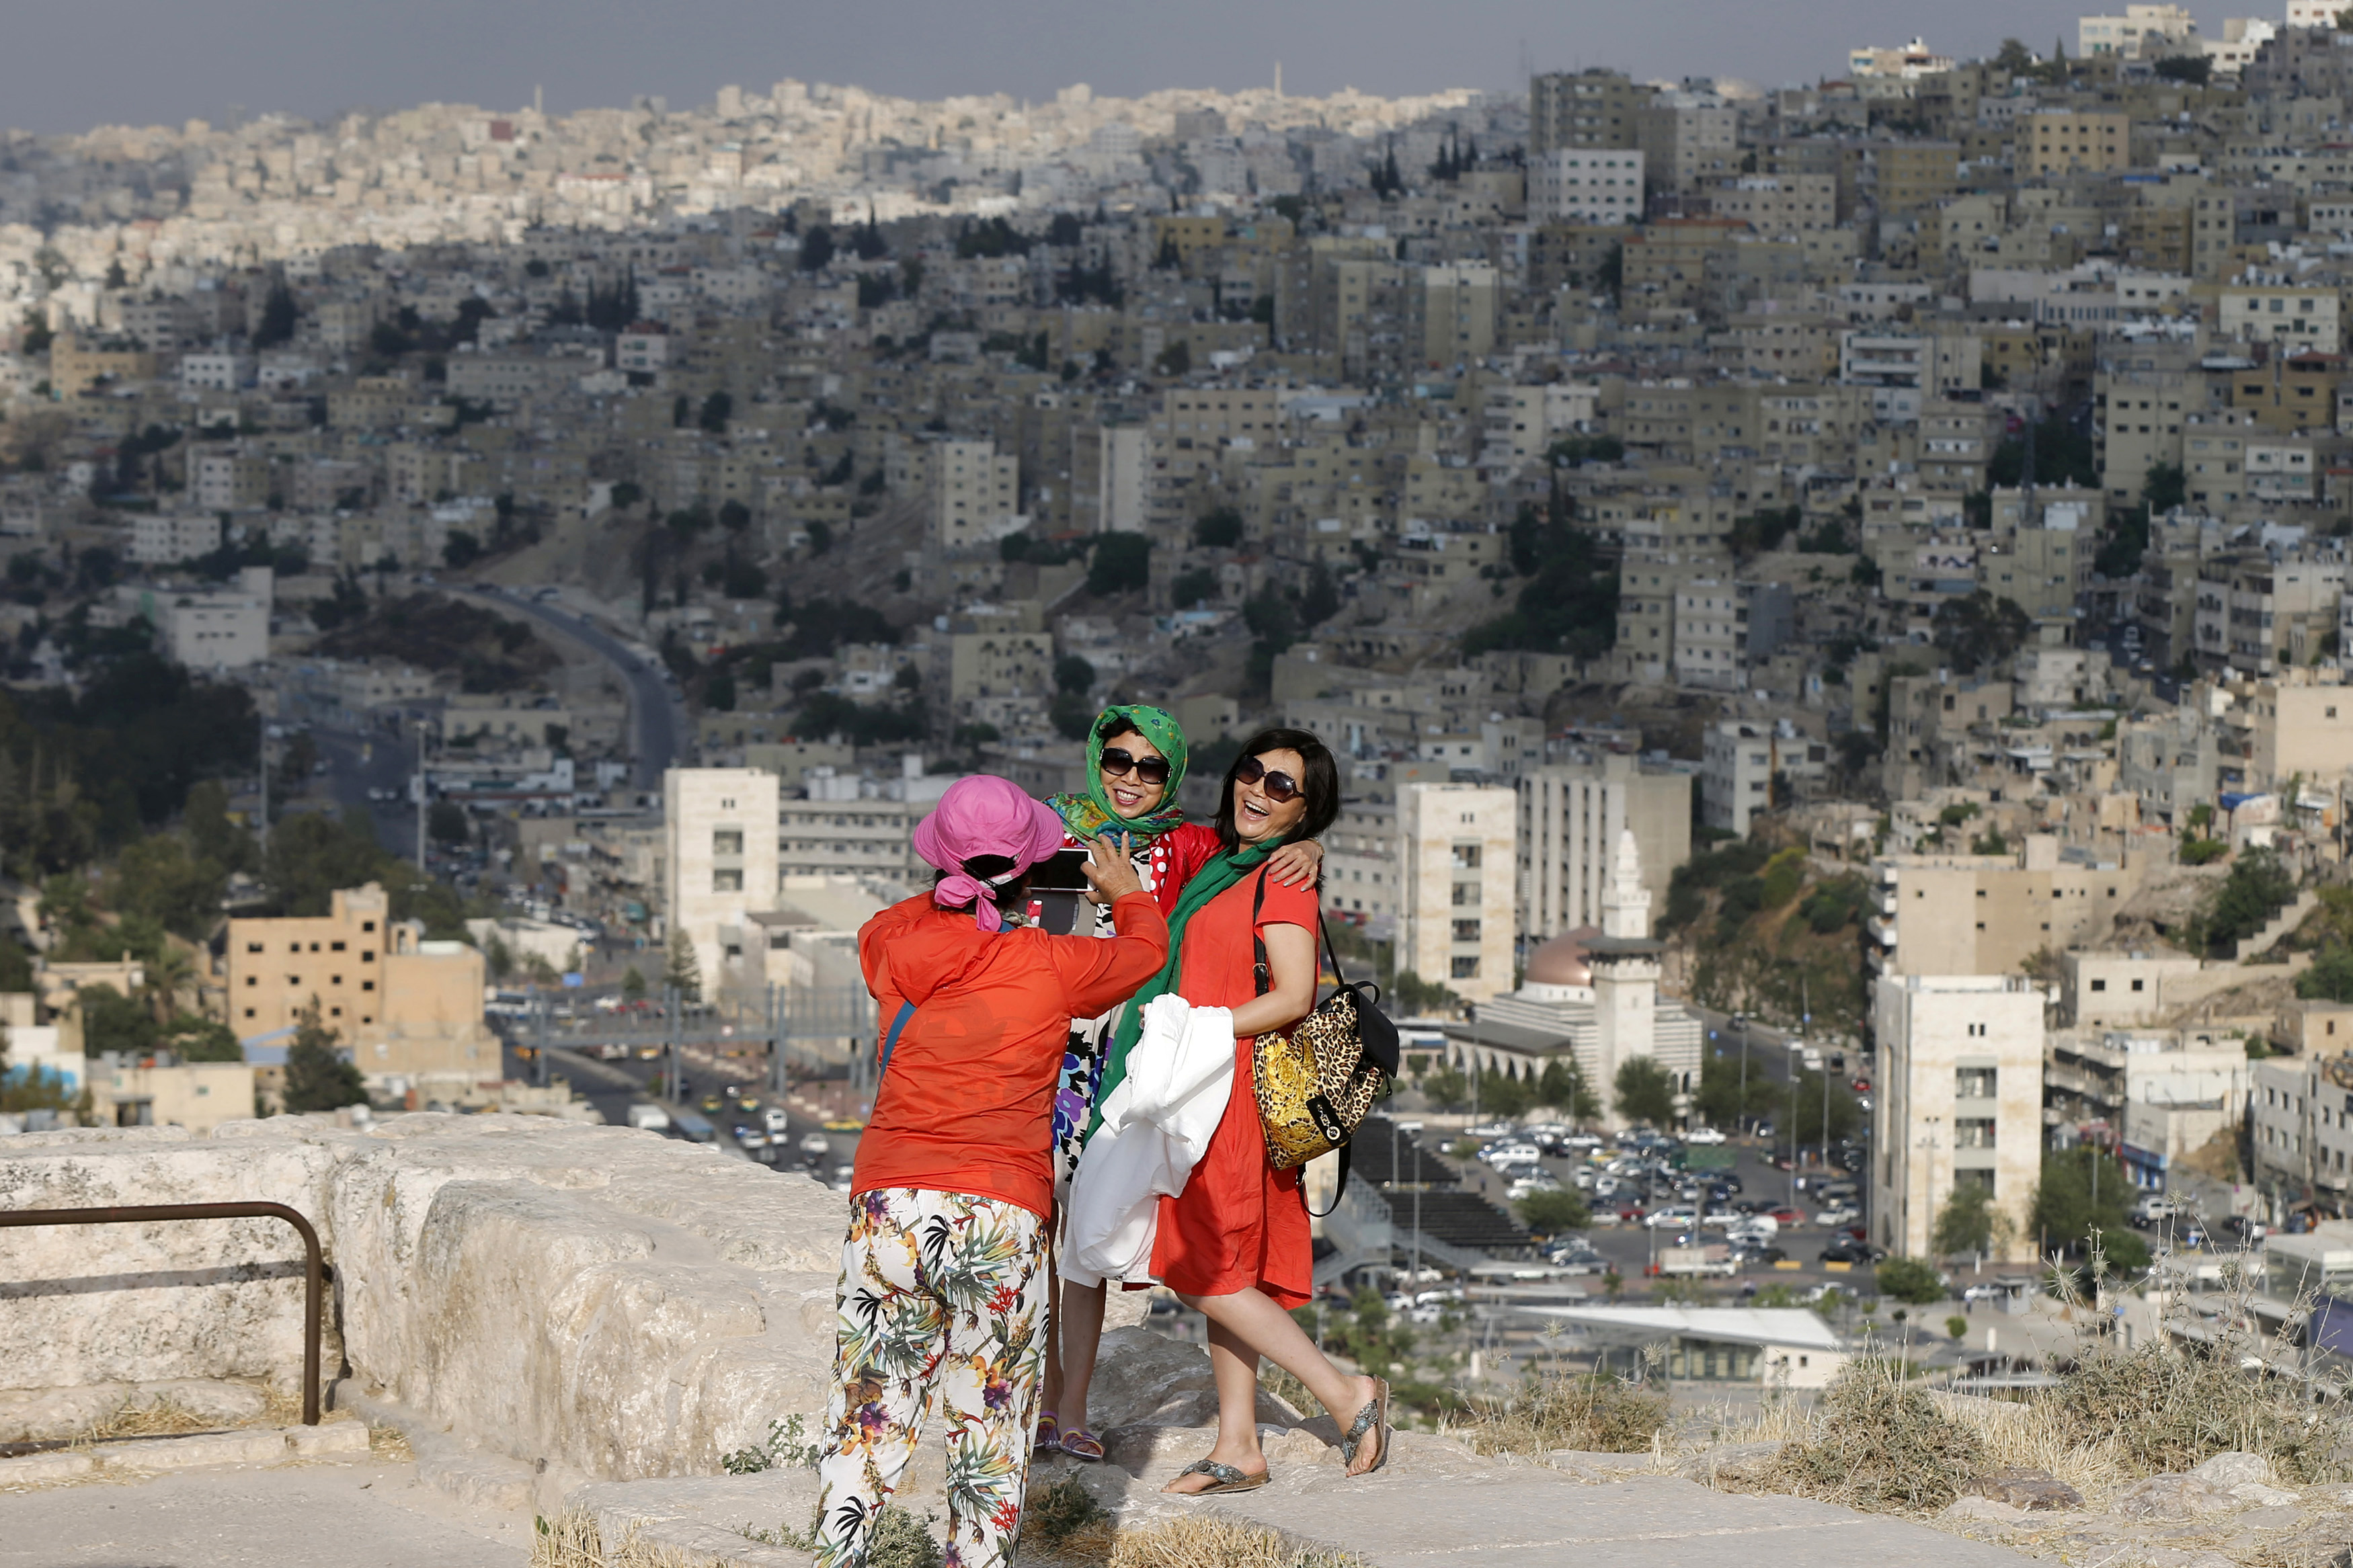 Chinese tourists take pictures during their visit to the Amman Citadel, an ancient Roman landmark in Amman, on May 23, 2016 (Muhammad Hamed—Reuters)